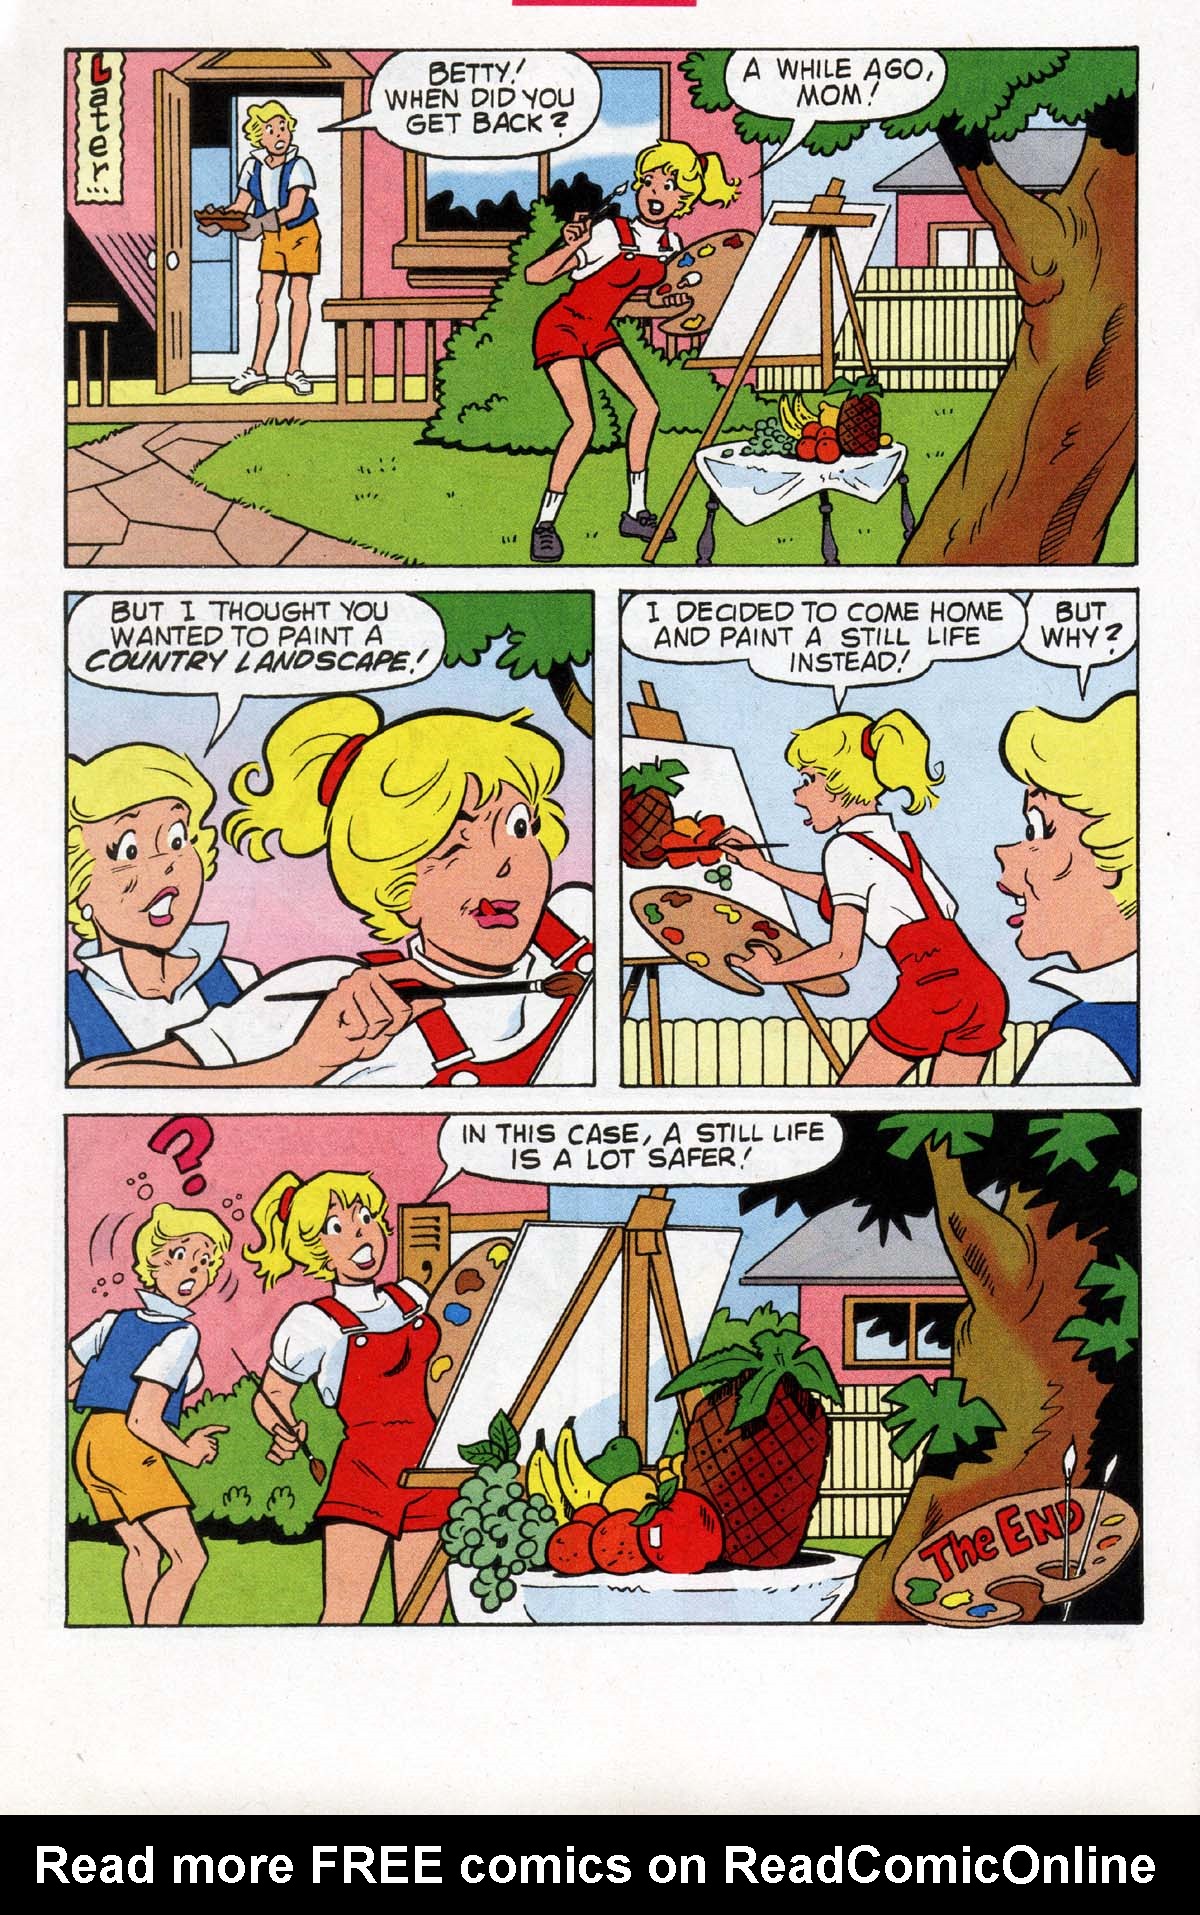 Read online Betty comic -  Issue #39 - 21